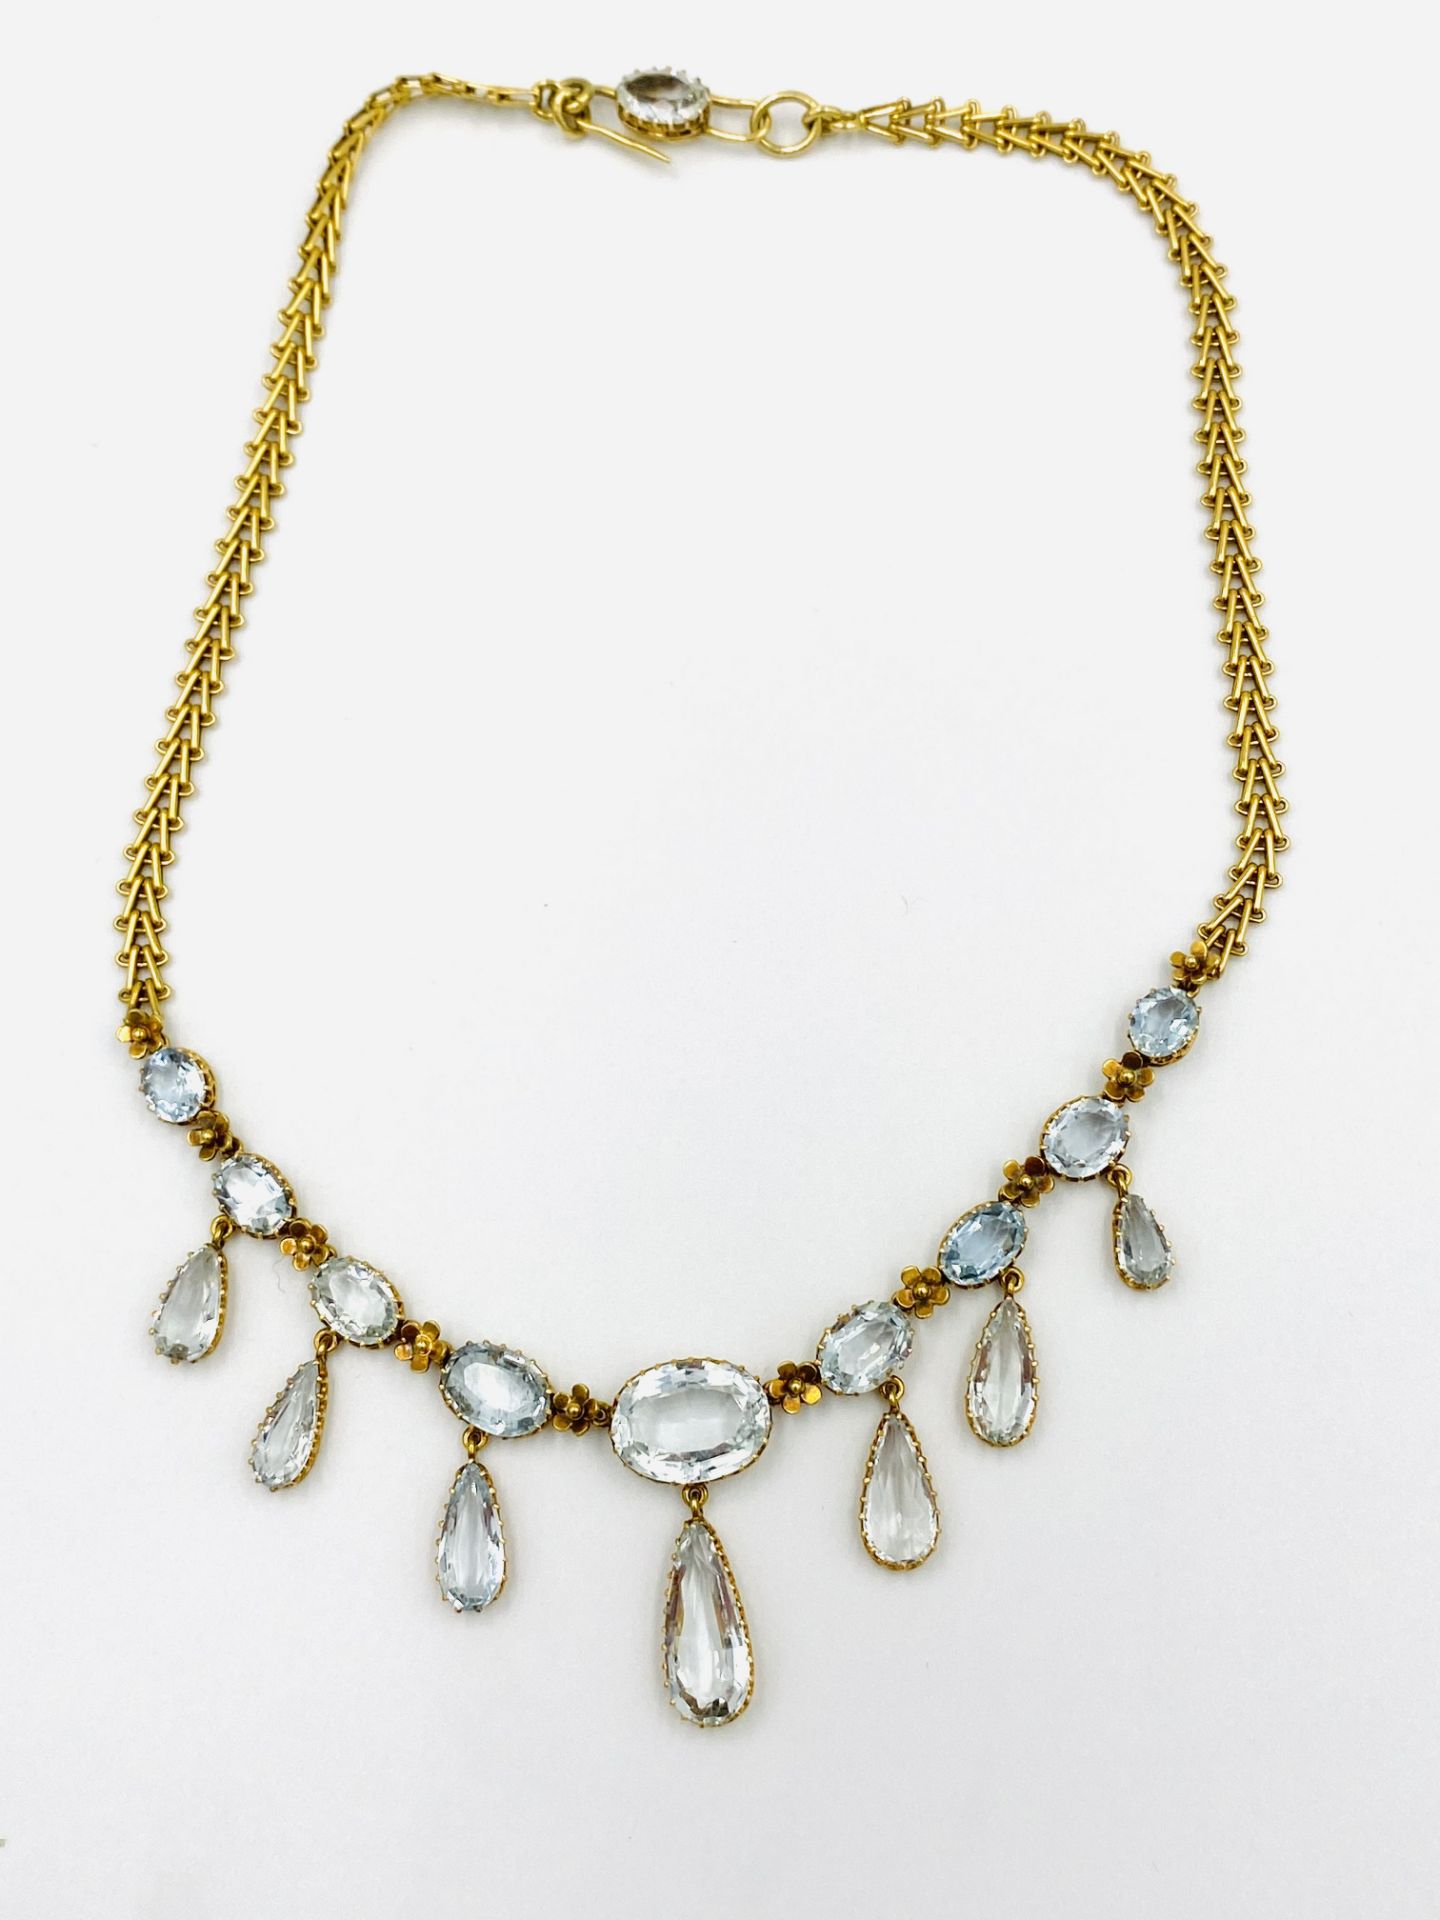 18ct gold and aquamarine necklace by Mrs. Newman - Image 2 of 6